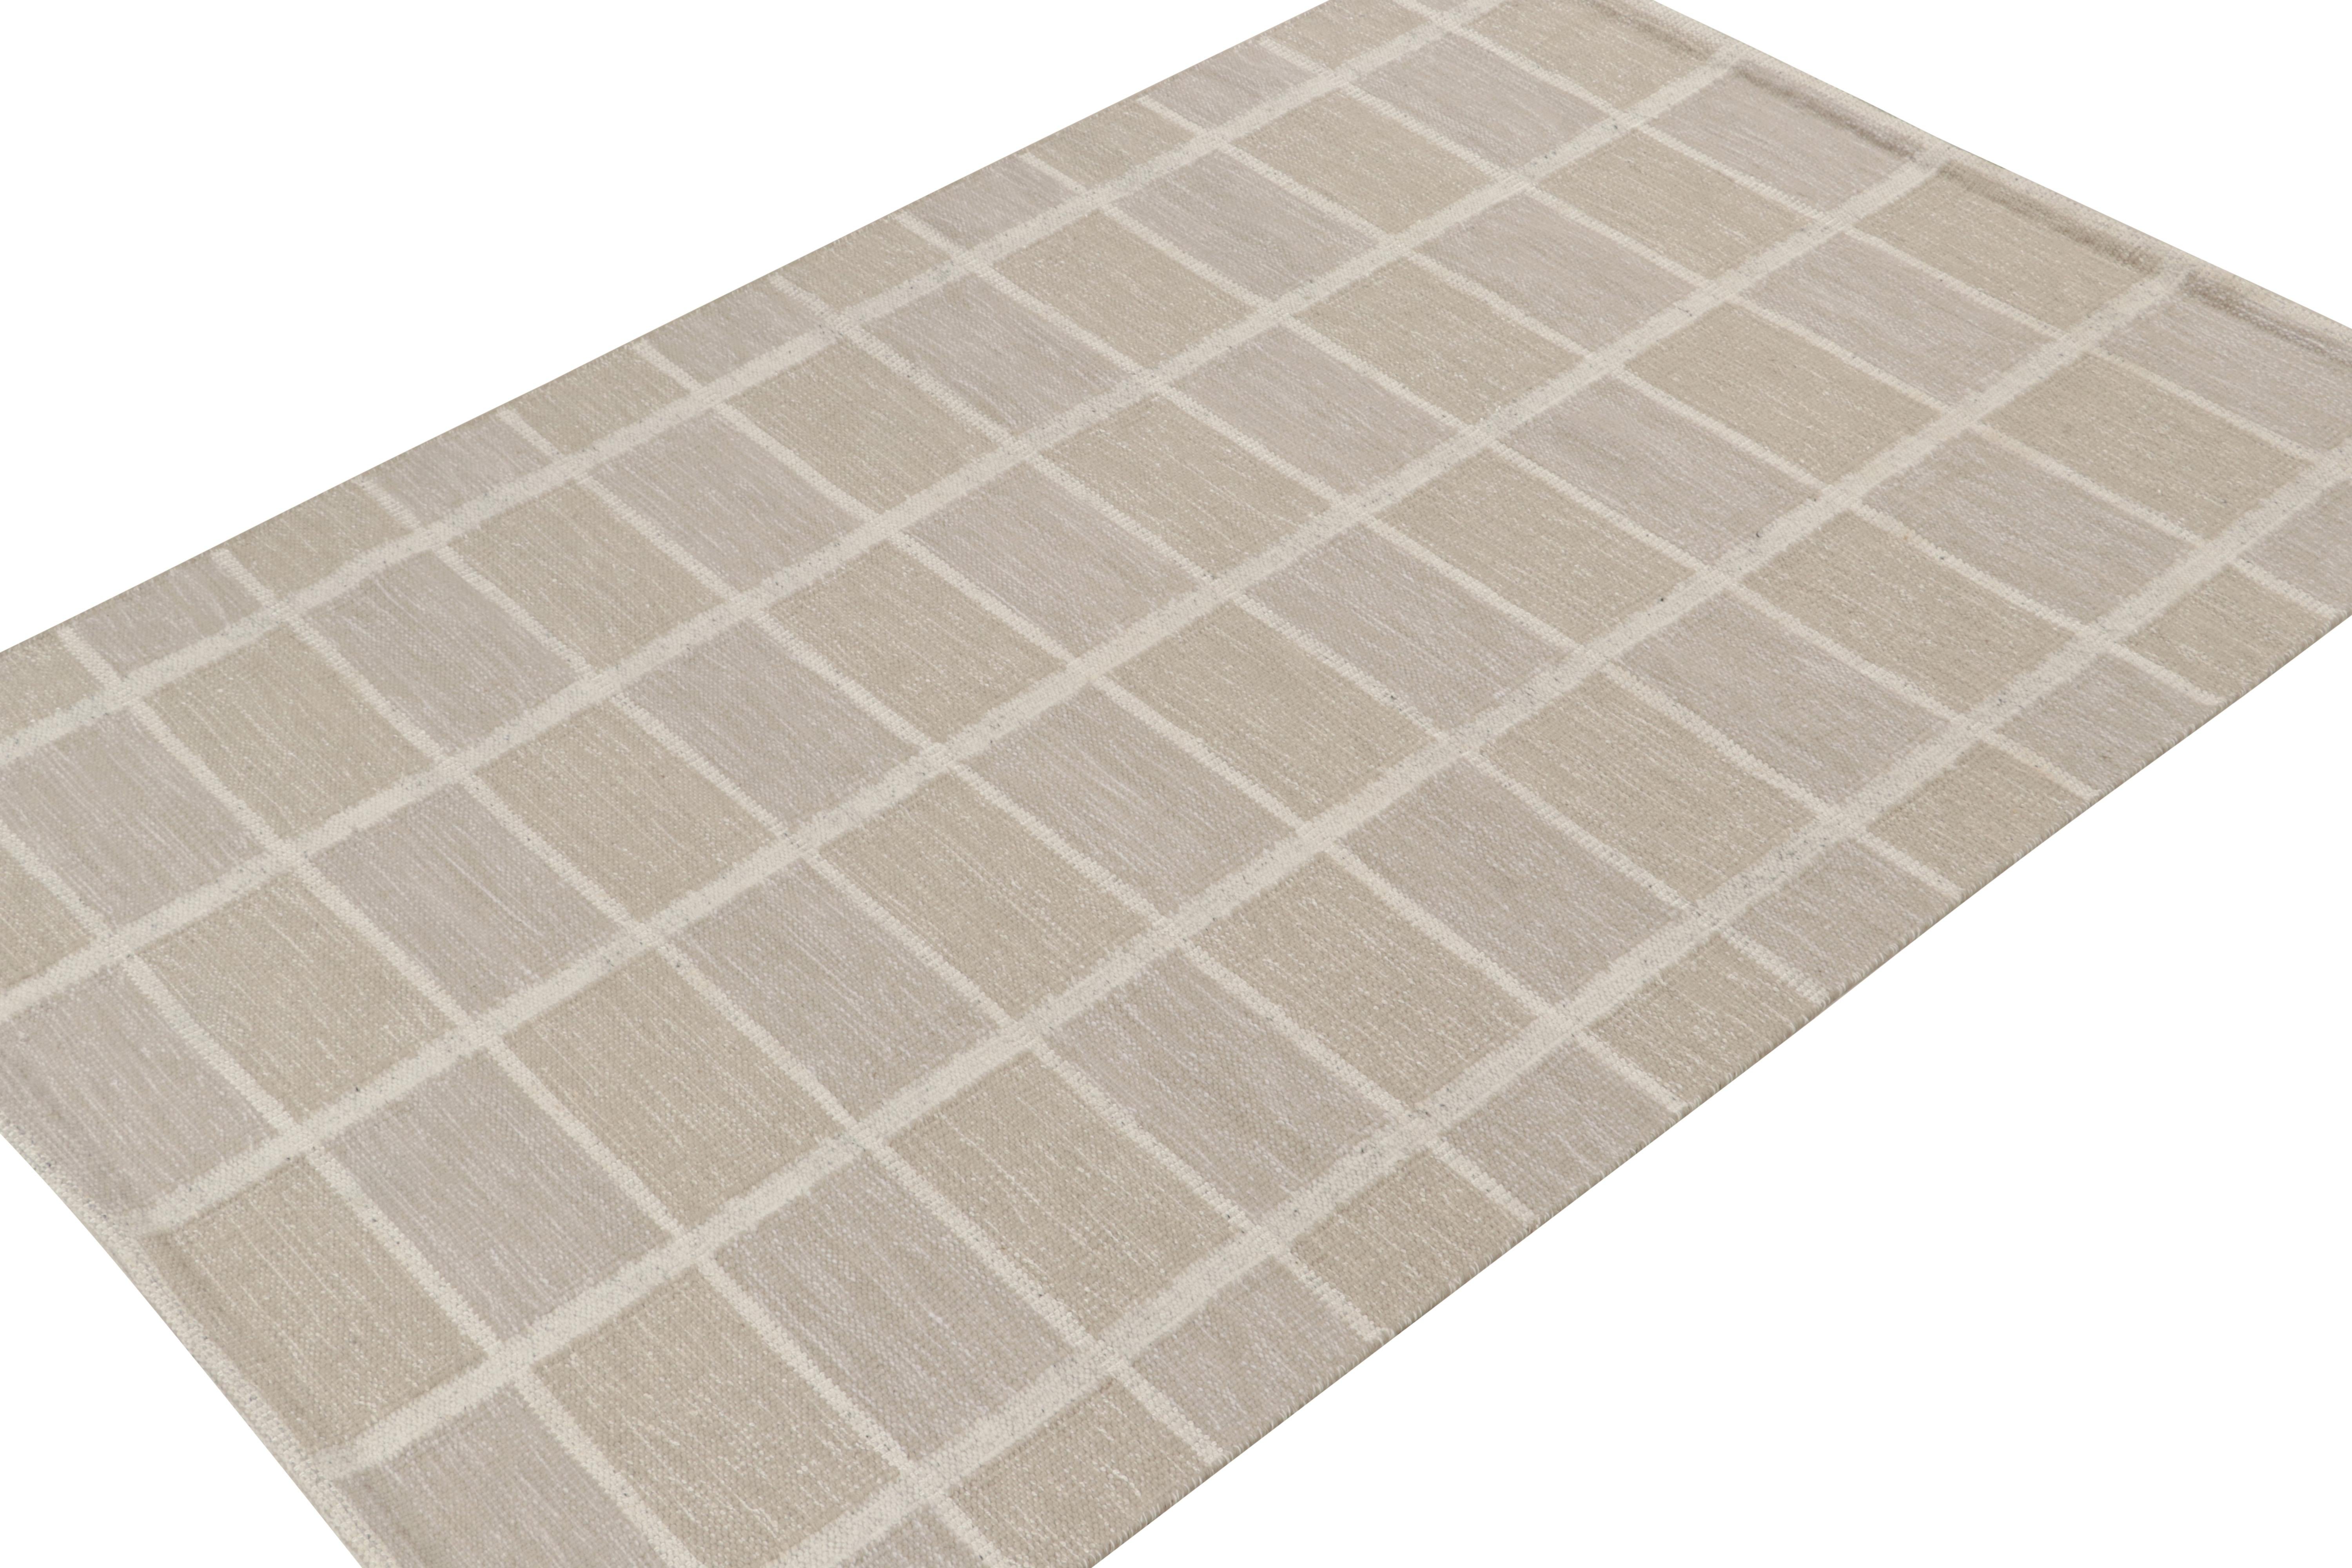 This smart 6x9 Swedish style kilim is the next addition to Rug & Kilim's award-winning Scandinavian flat weave collection. Handwoven in wool. 
Further On the Design: 
This rug enjoys geometric patterns in crisp beige and white, with taupe